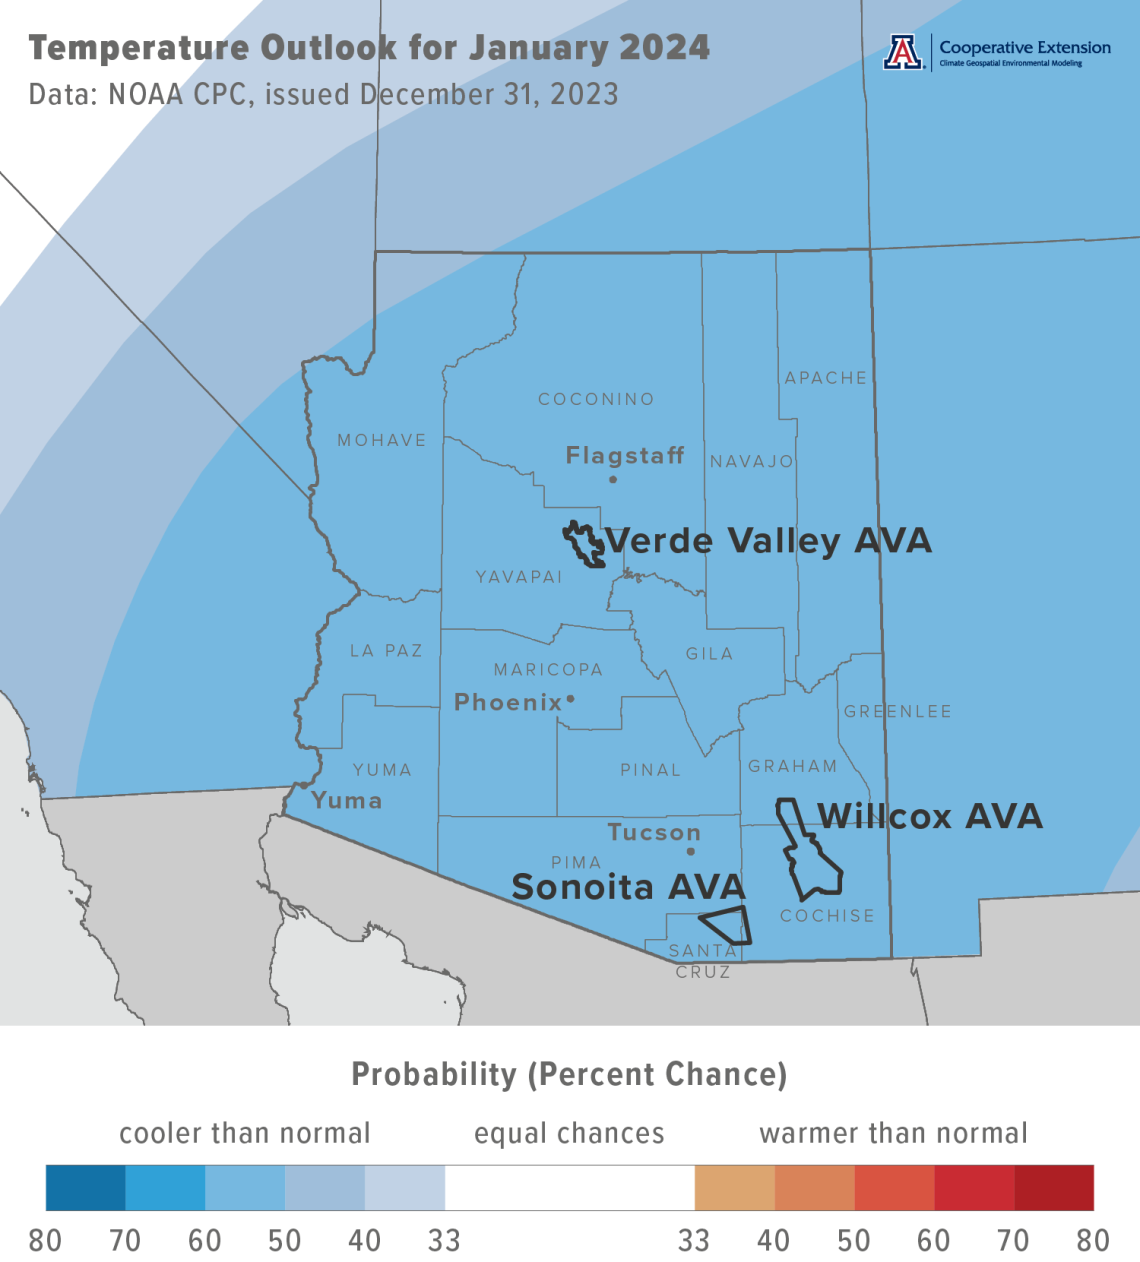 January 2024 temperature outlook map for Arizona